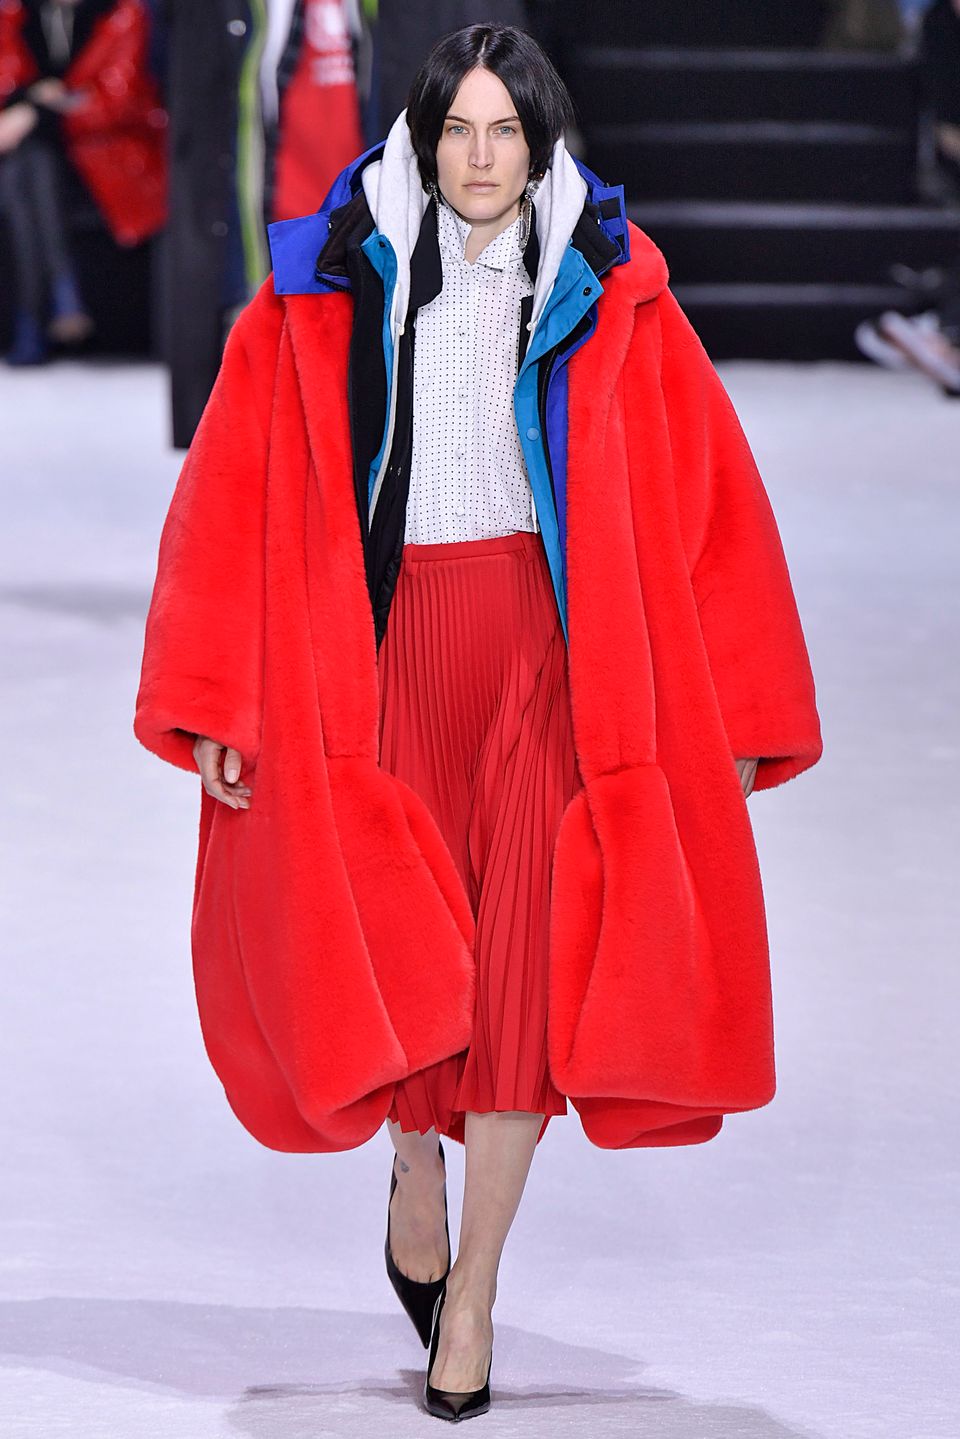 Ridiculously Oversized Coats Are Fall 2018's Comfiest Trend